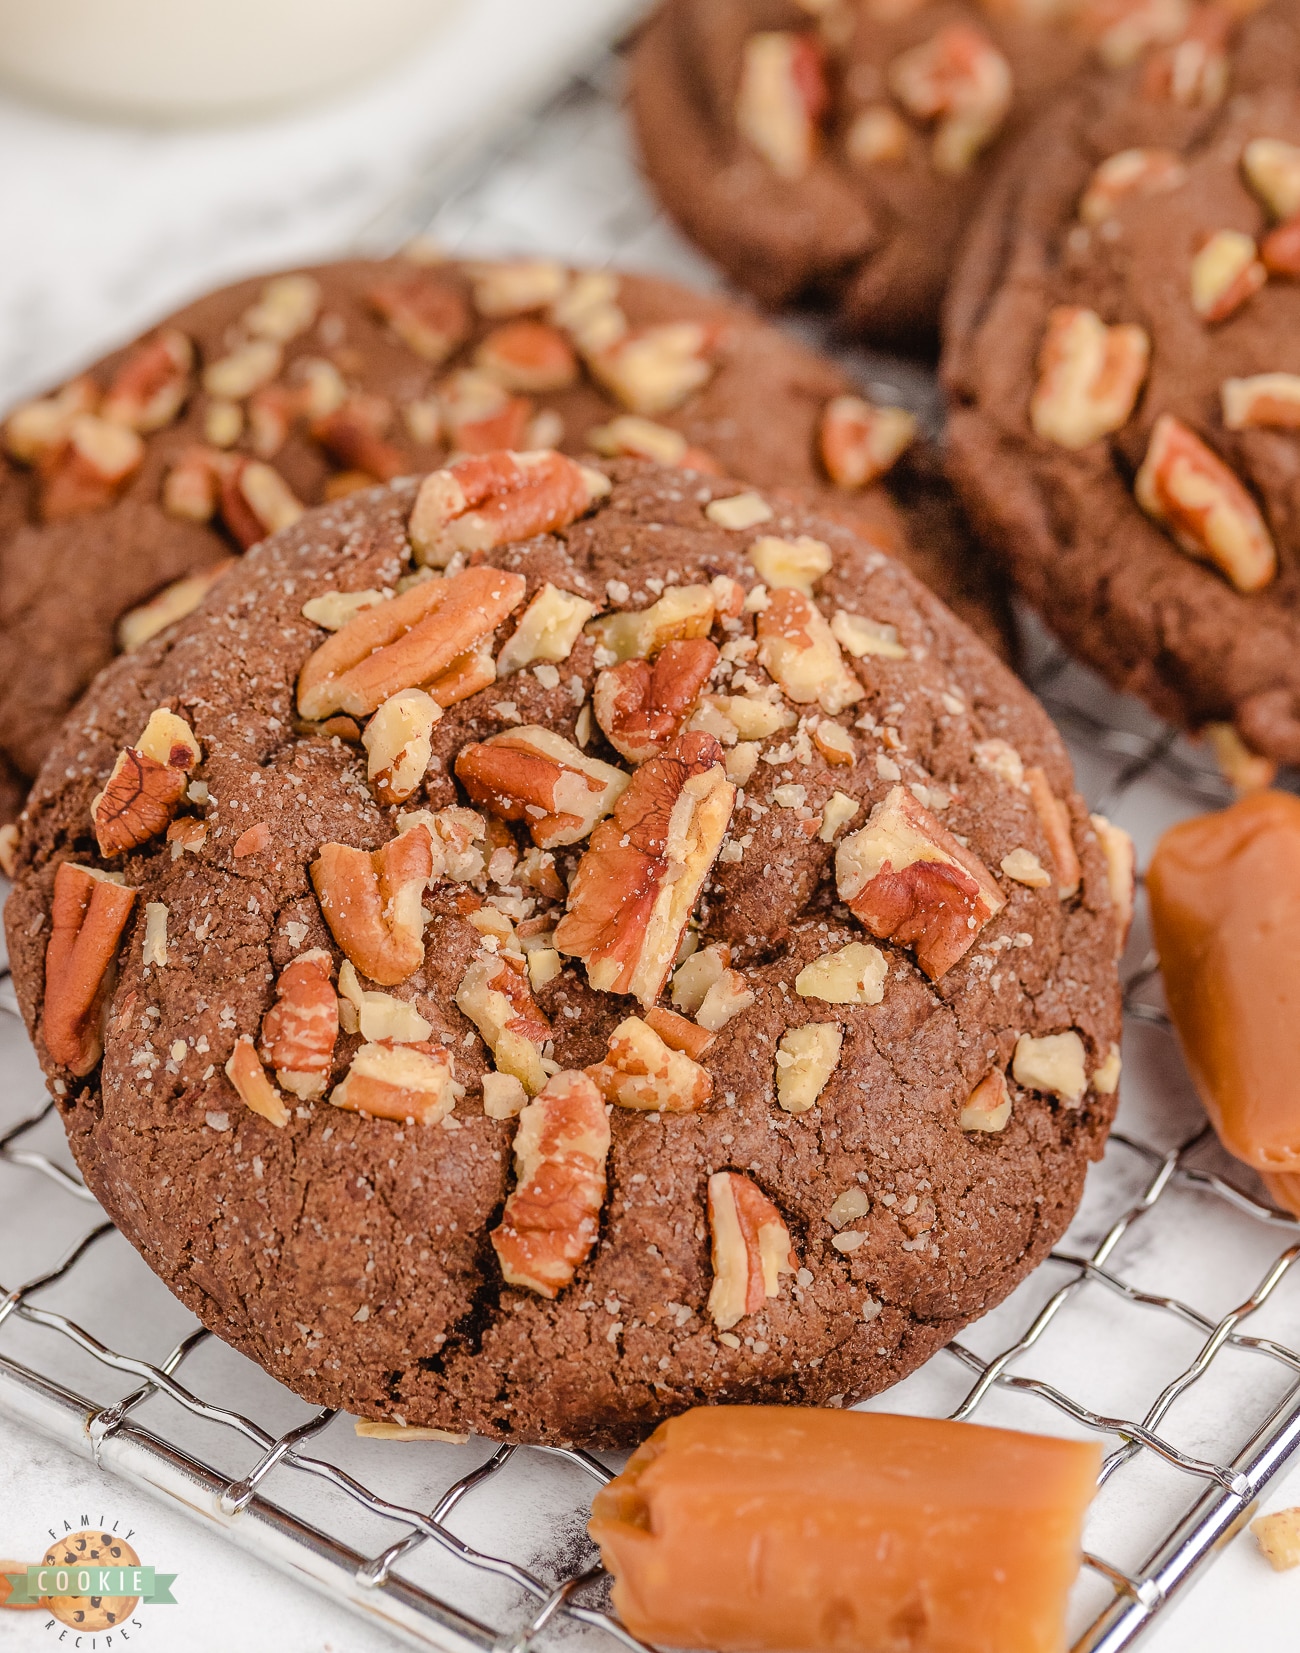 chocolate cookies stuffed with caramel and rolled in pecans